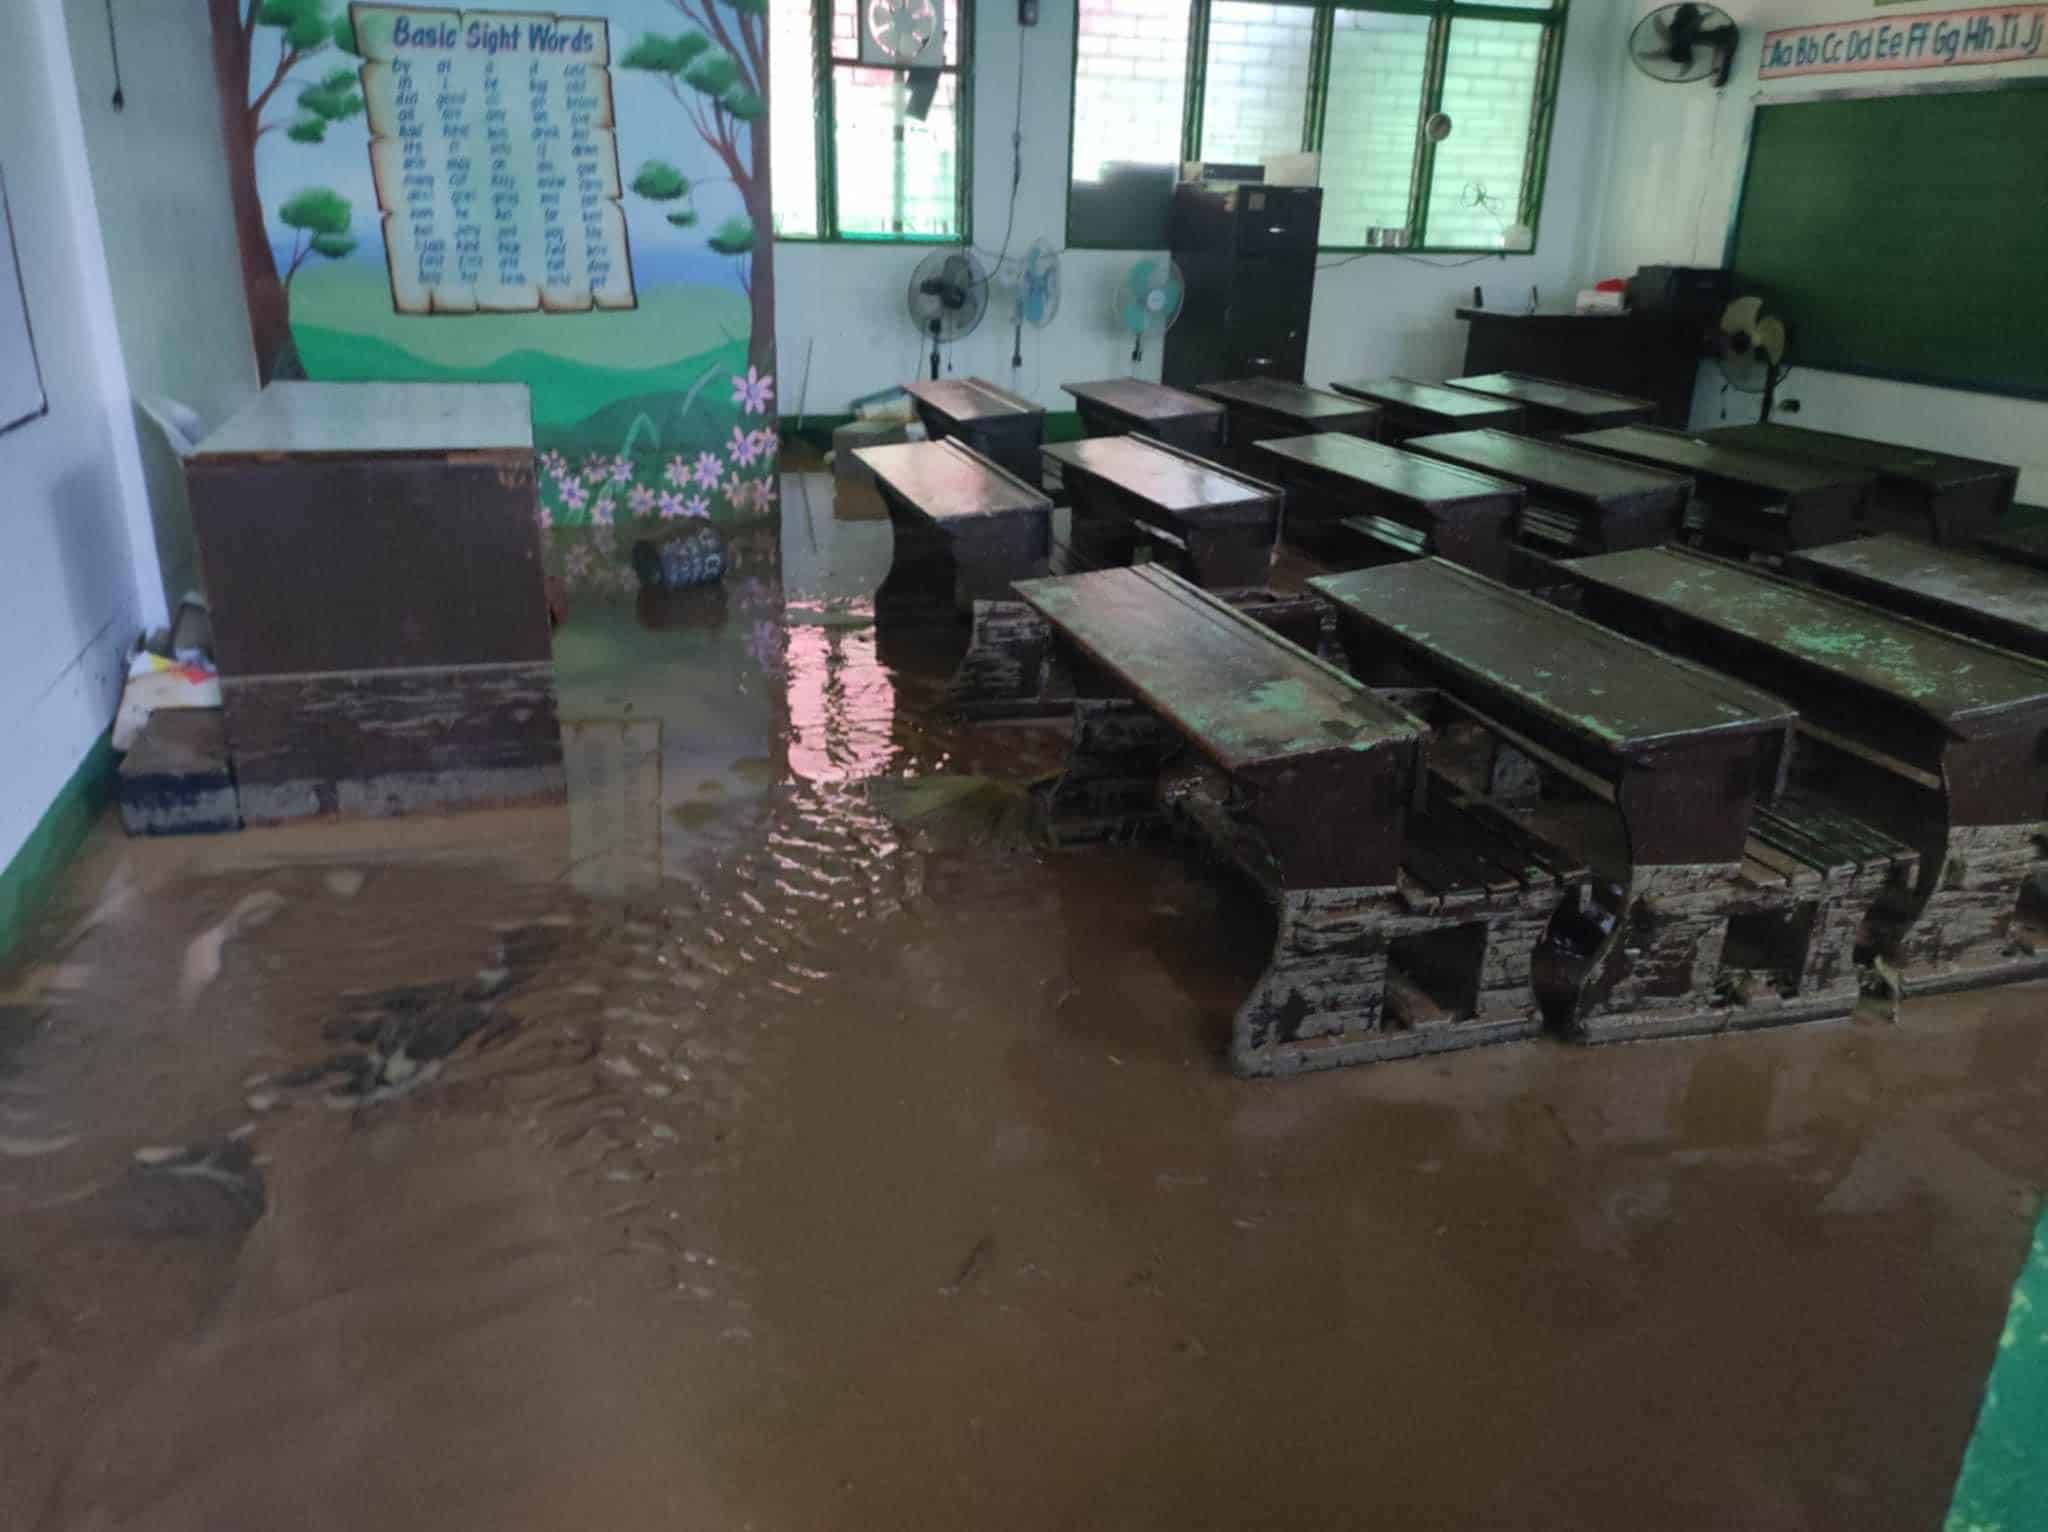 Ninety schools nationwide sustained damage due to the effects of typhoon Carina and the southwest monsoon, locally called habagat, according to the Department of Education (DepEd).